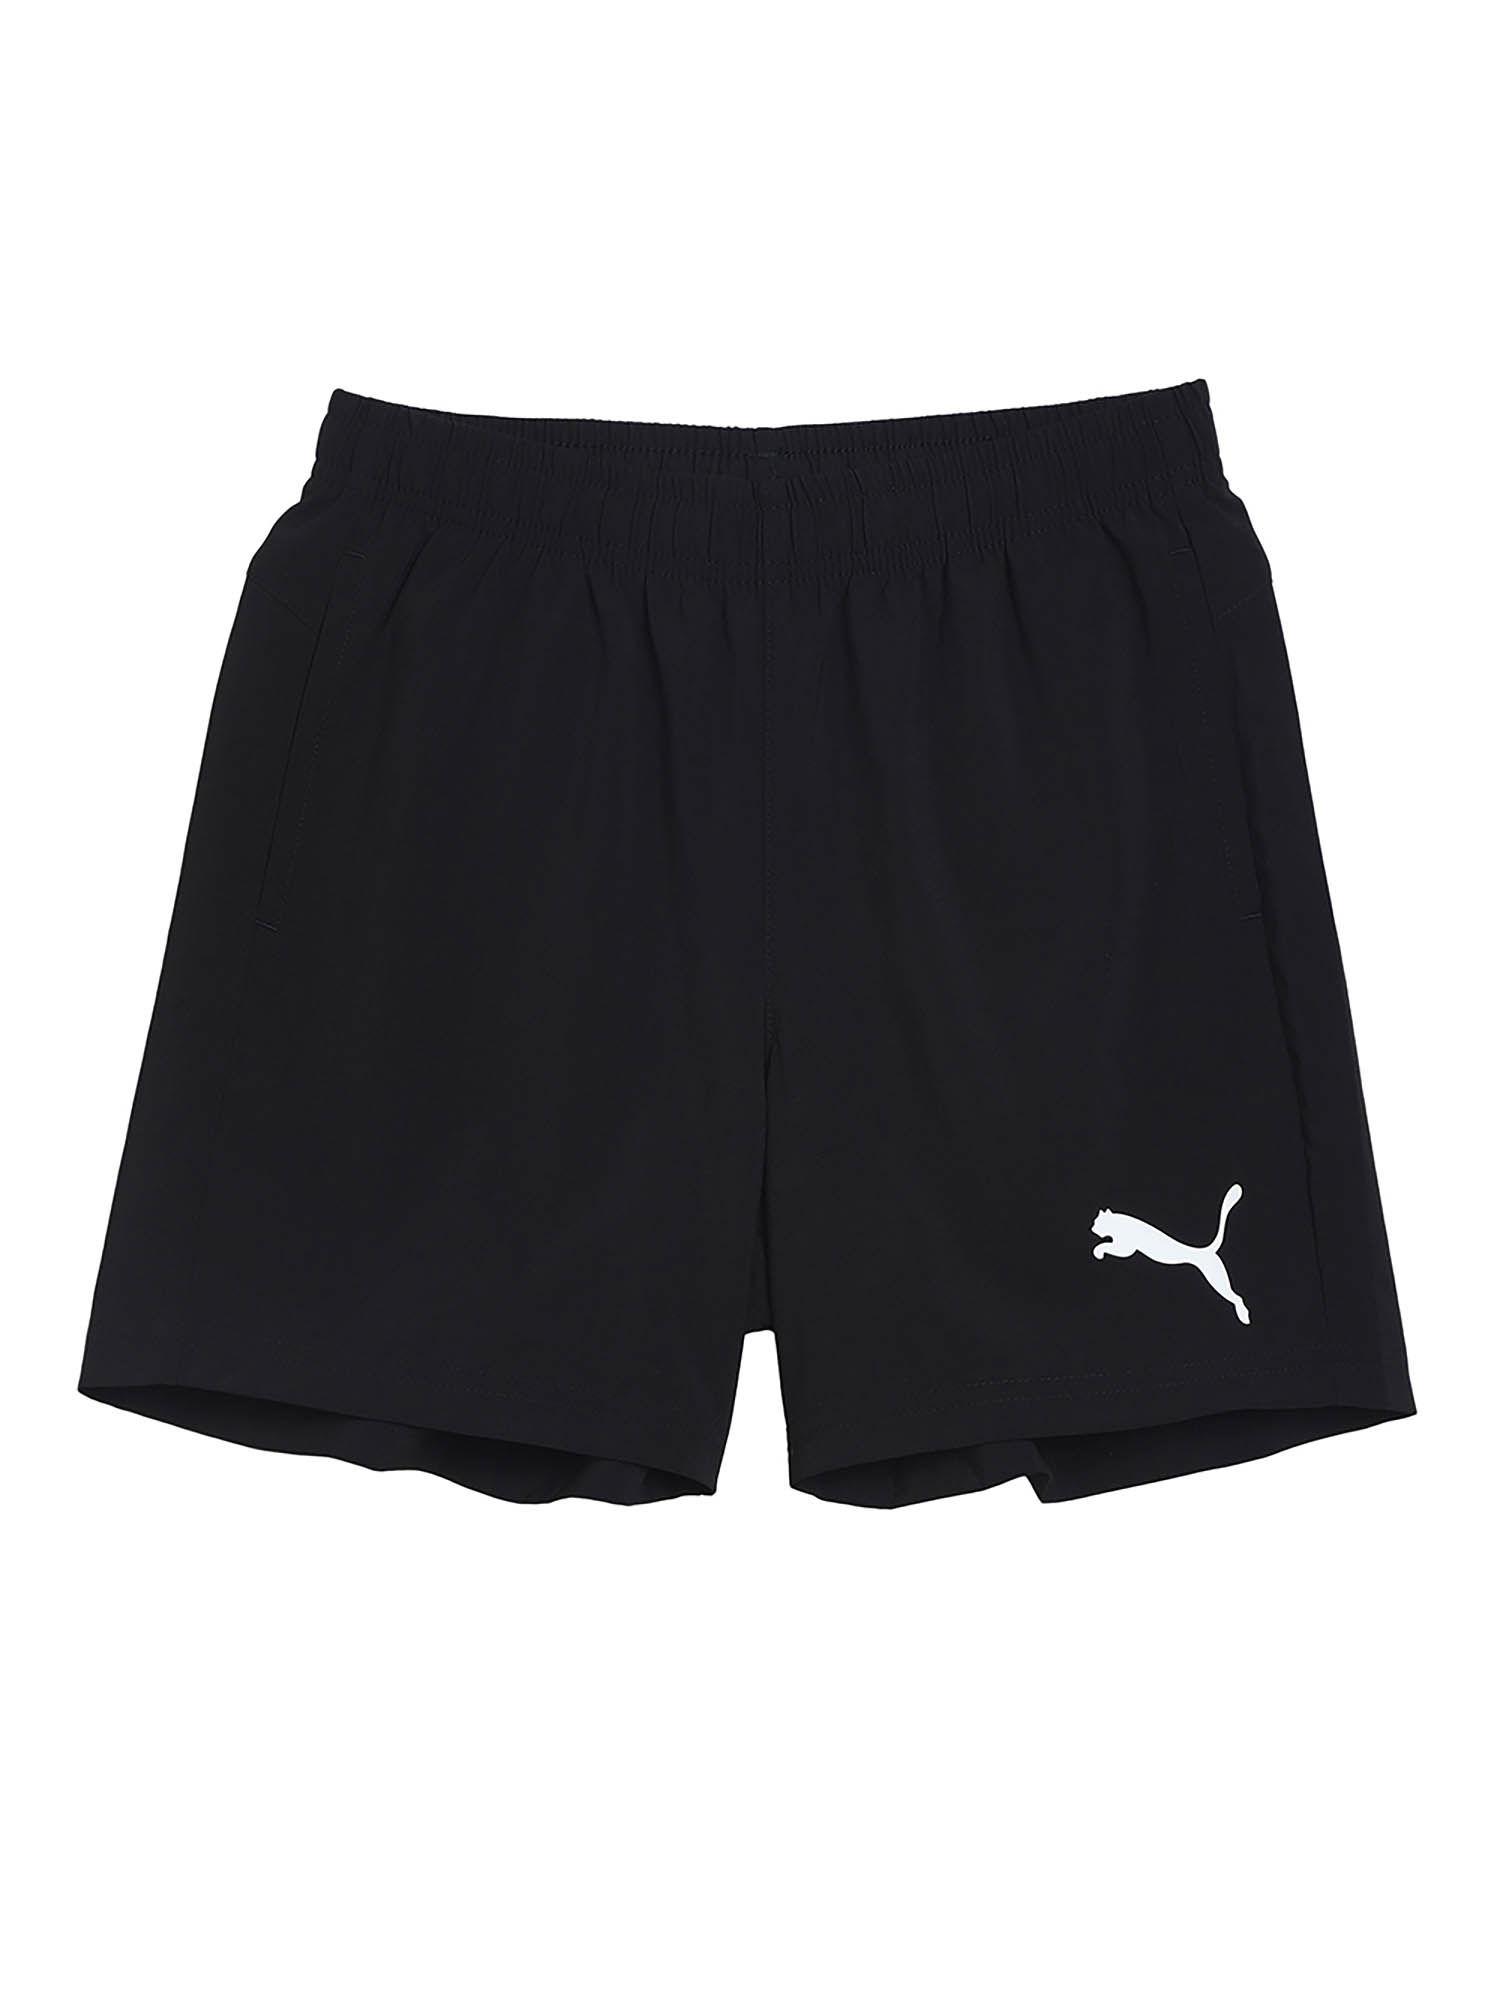 black solid active woven kids shorts